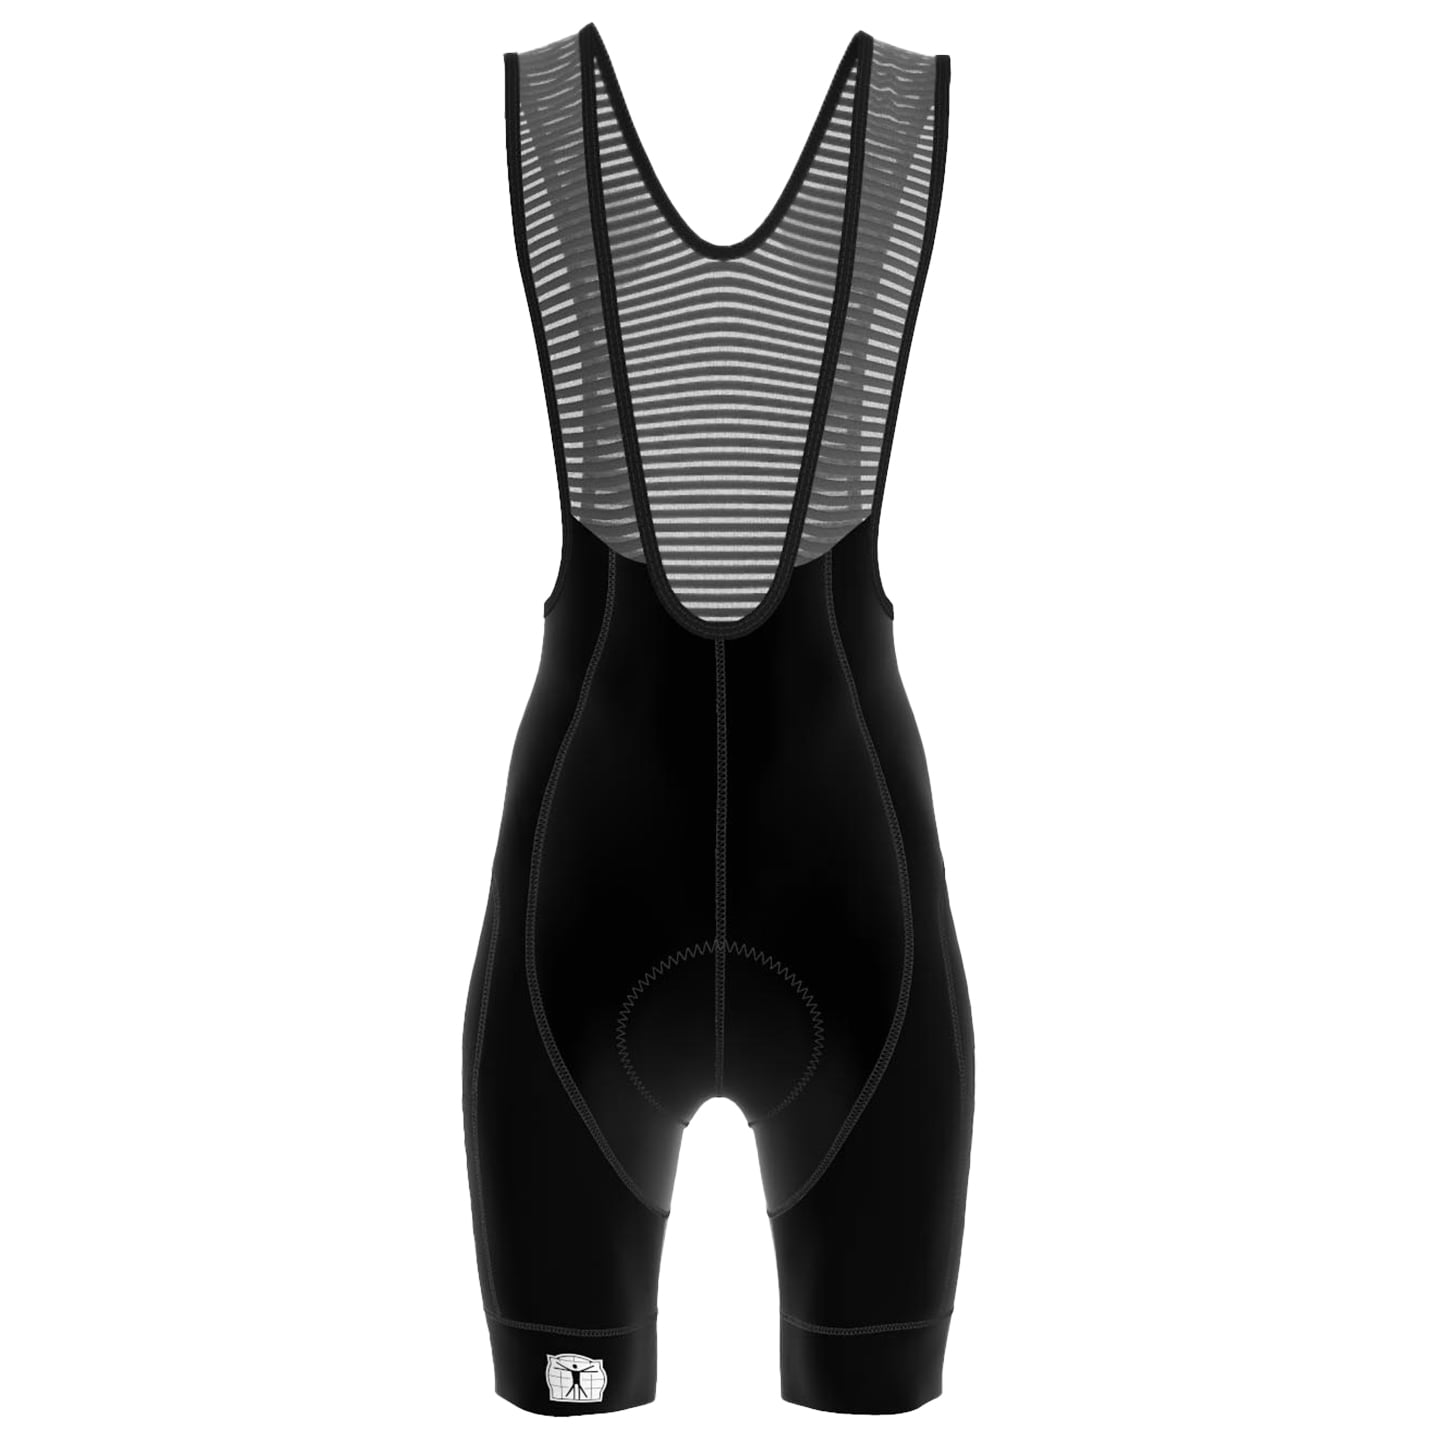 BELGIAN NATIONAL TEAM Olympic Edt. 2024 Bib Shorts, for men, size 2XL, Cycle trousers, Cycle gear